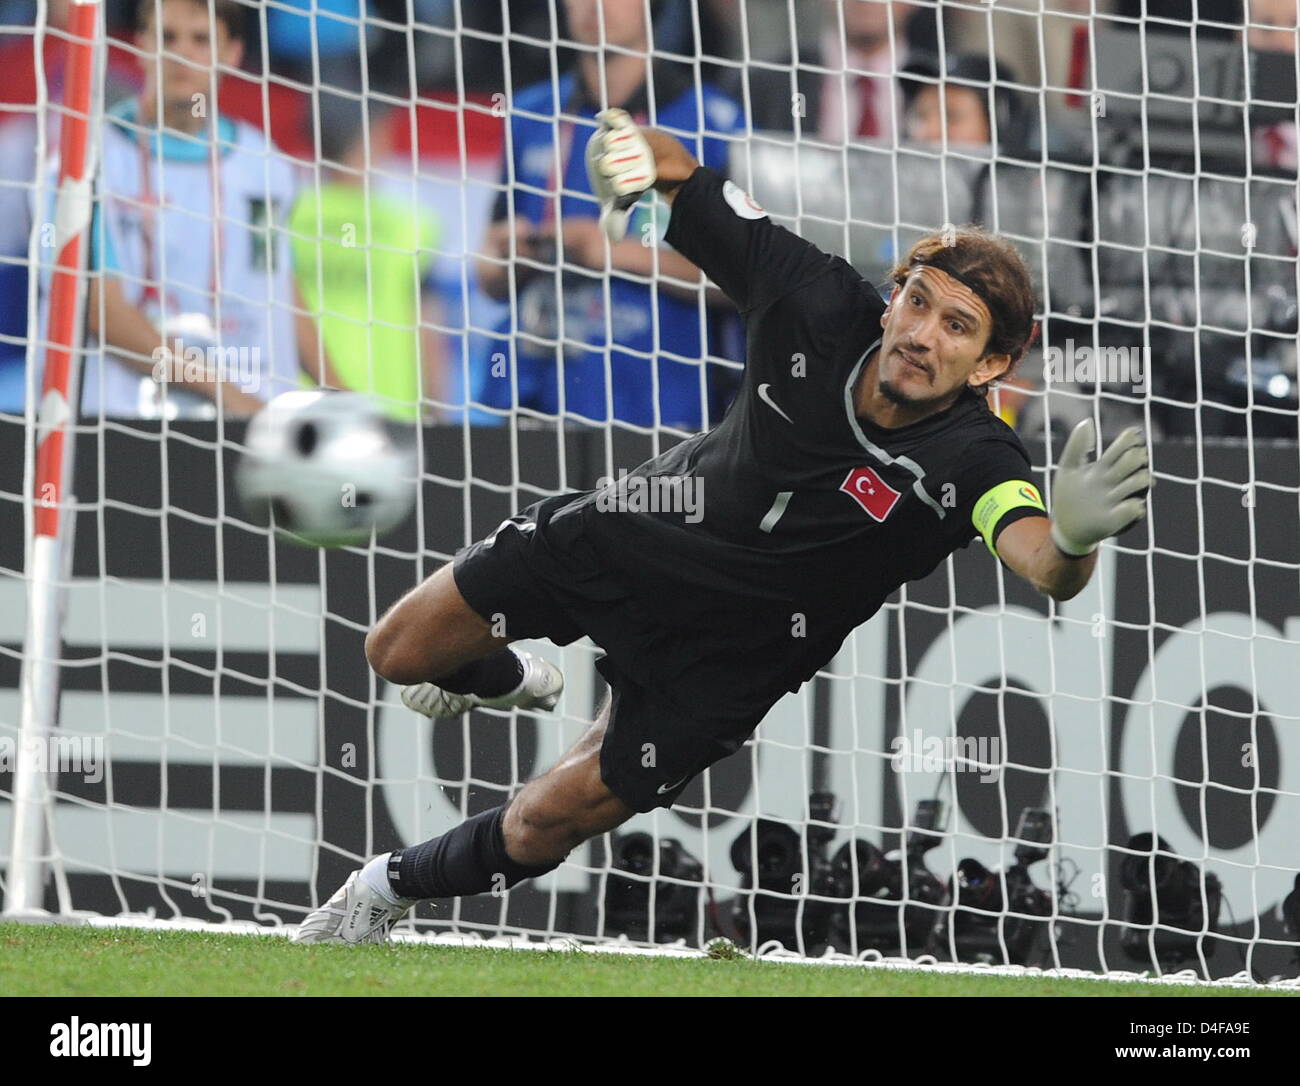 Goalkeeper Recber Ruestue of Turkey in action during Penalty shootout of the UEFA EURO 2008 quarter final match between Croatia and Turkey at the Ernst Happel stadium in Vienna, Austria, 20 June 2008. Croatia lost 1-3 after penalty shootout. Photo: Achim Scheidemann dpa +please note UEFA restrictions particulary in regard to slide shows and ÒNo Mobile ServicesÒ +++###dpa###+++ Stock Photo